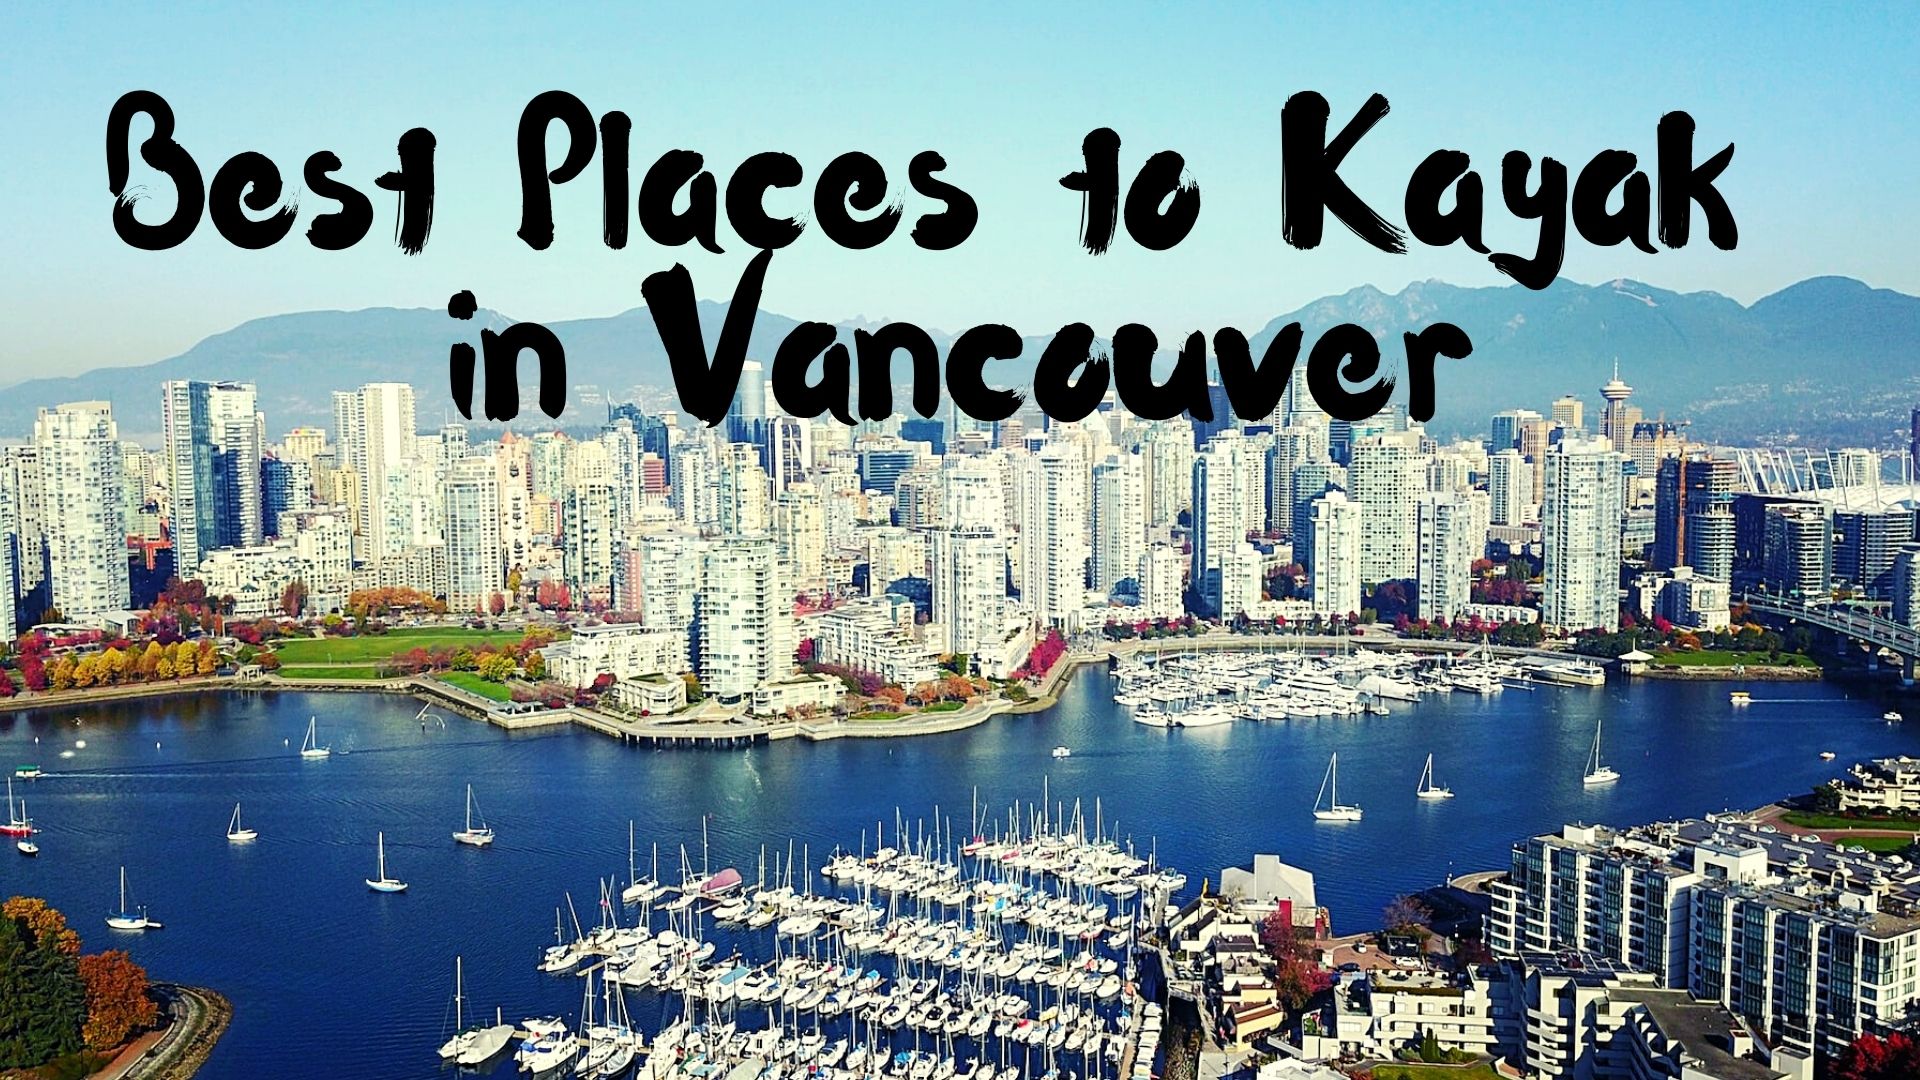 Best Places to Kayak in Vancouver